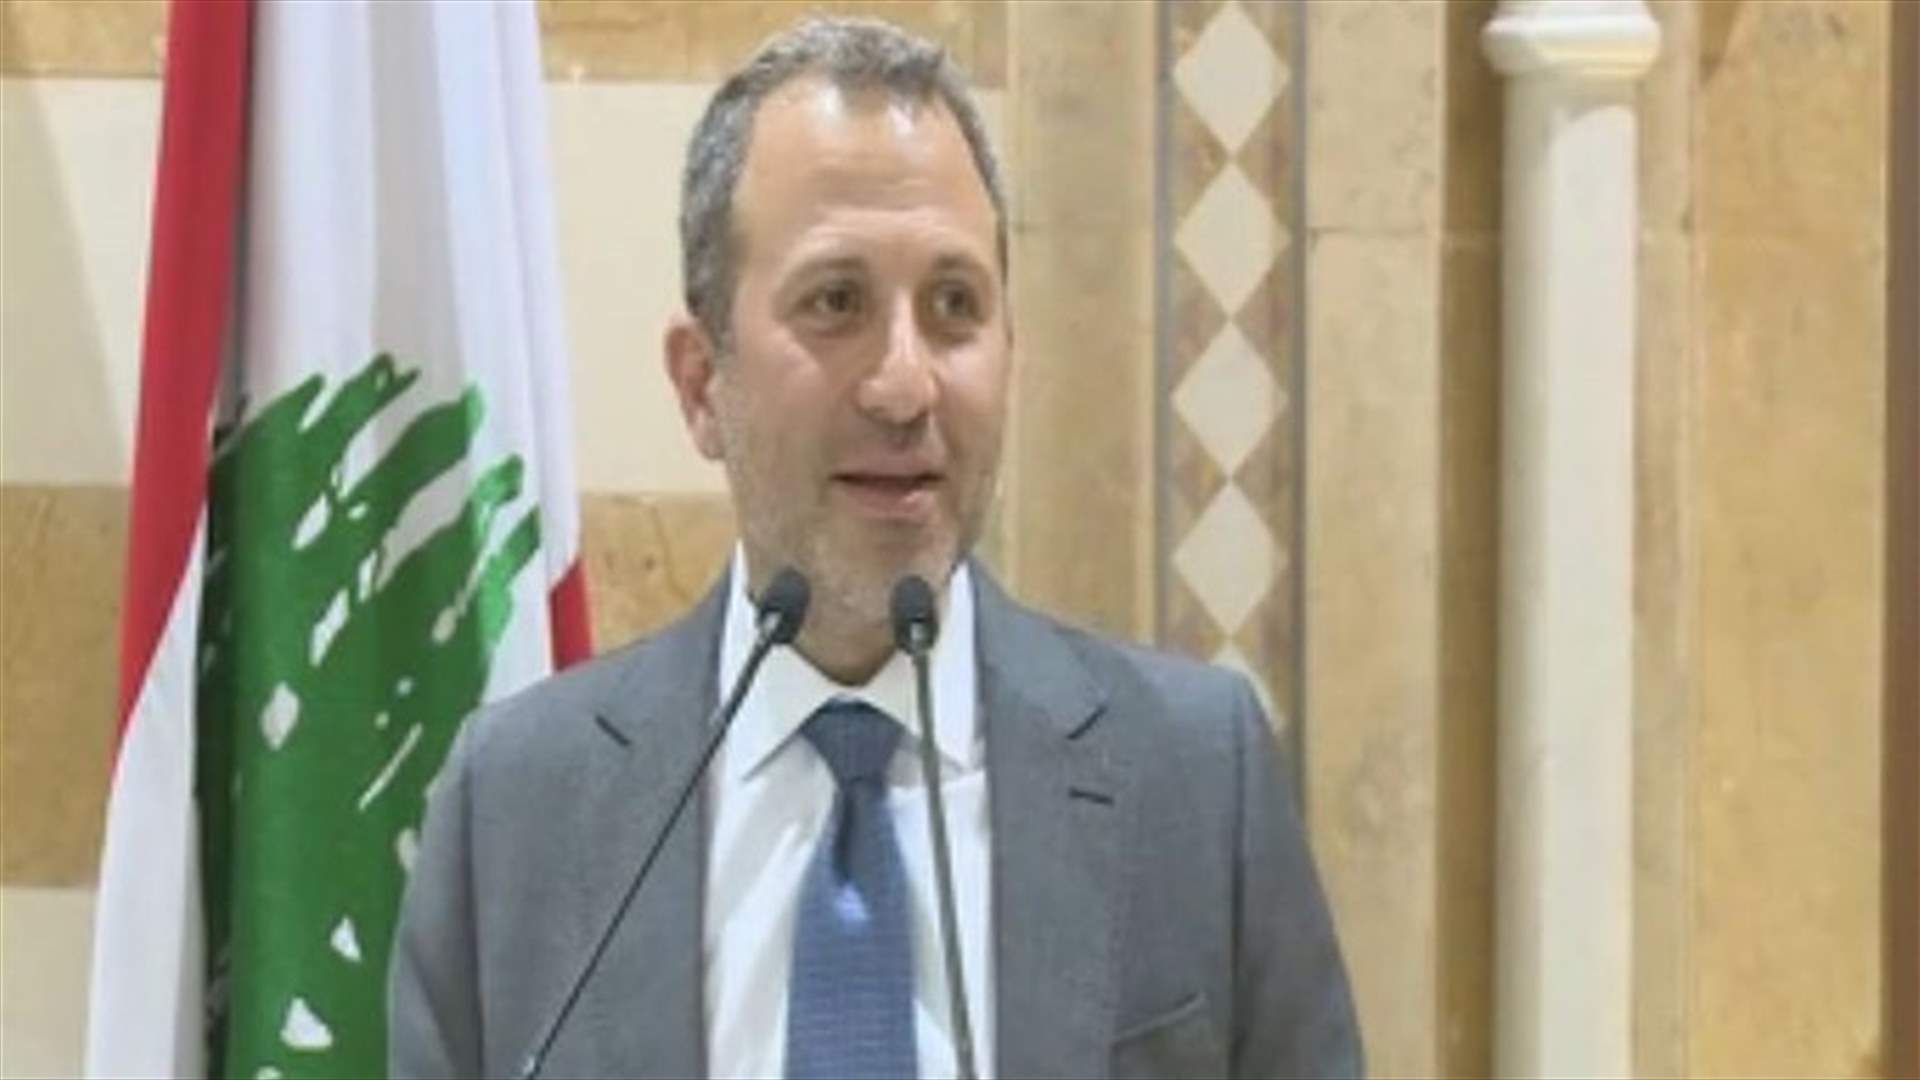 Bassil from Beit al-Wasat: I think we are moving in the right direction concerning cabinet formation